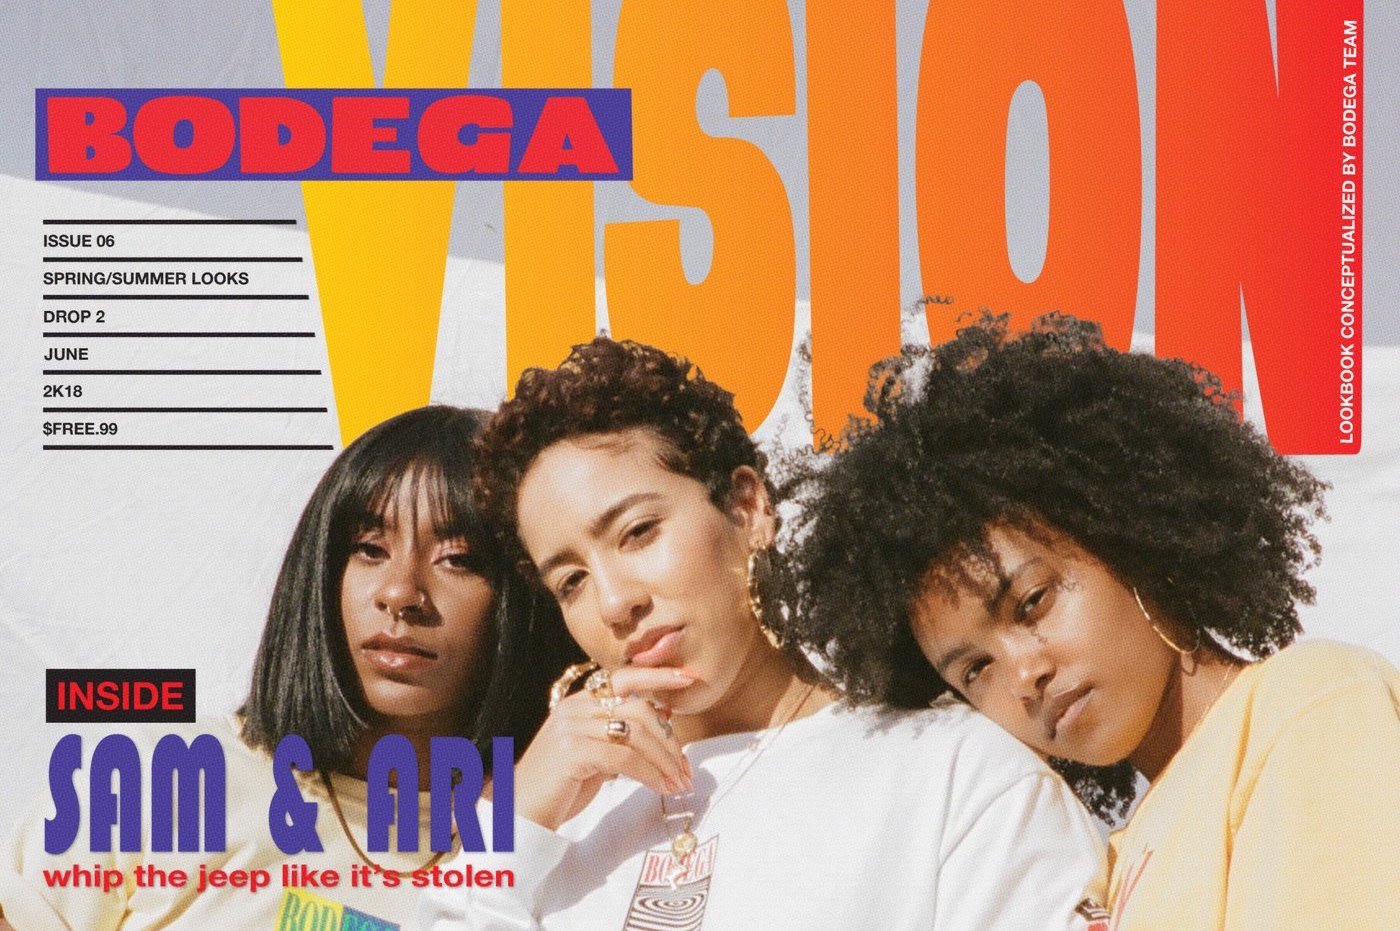 A Look at Bodega’s Spring/Summer 2018 Delivery 2 Editorial